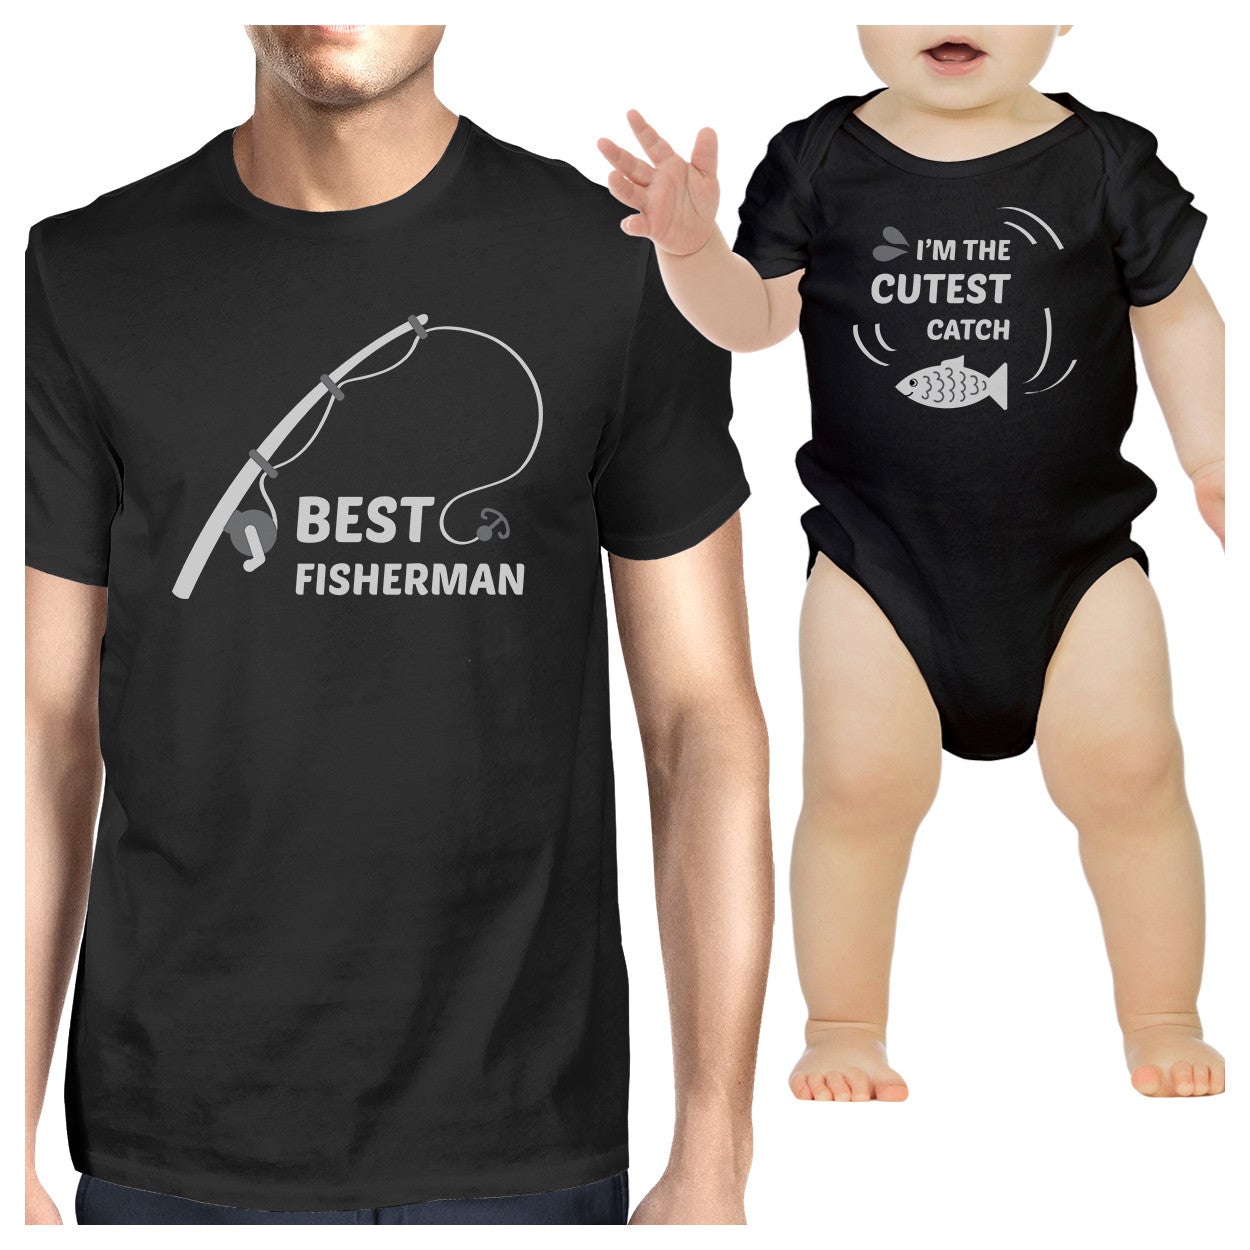 Best Fisherman Cutest Catch Dad and Baby Matching Black Shirts